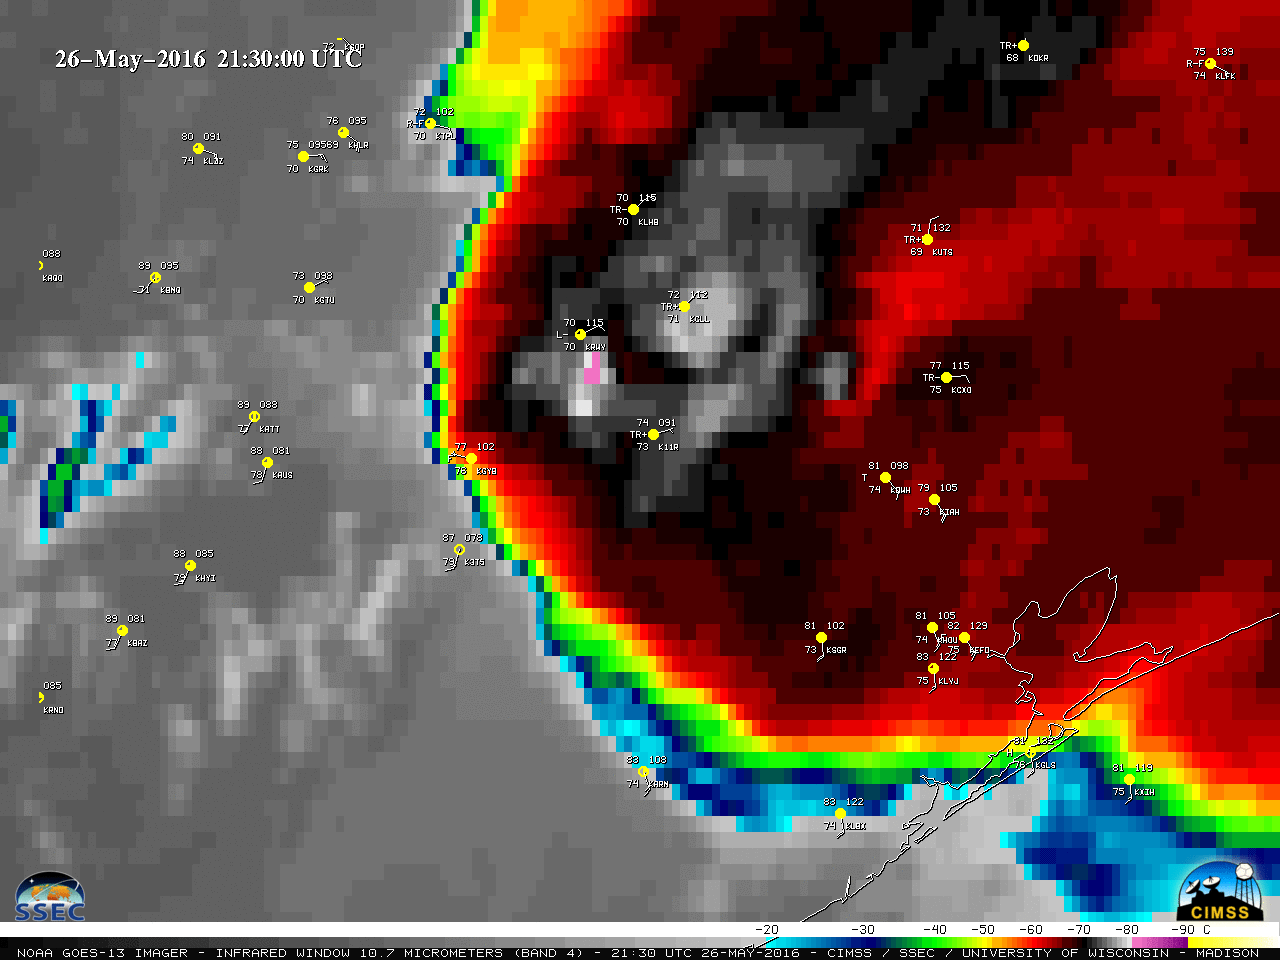 GOES-13 Infrared Window (10.7 µm) images [click to play animation]